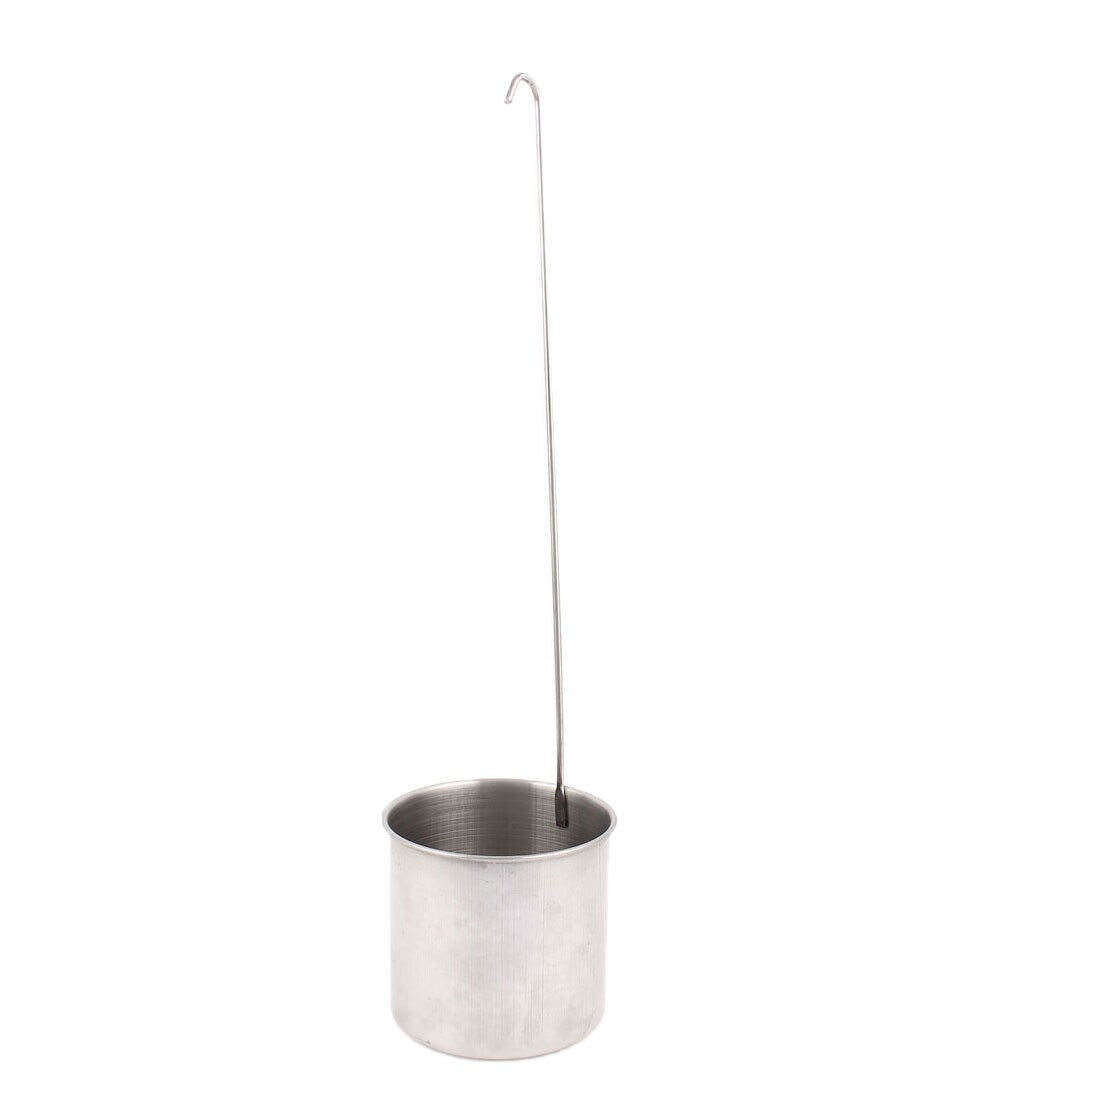 Measuring cup, stainless steel, 500 ml